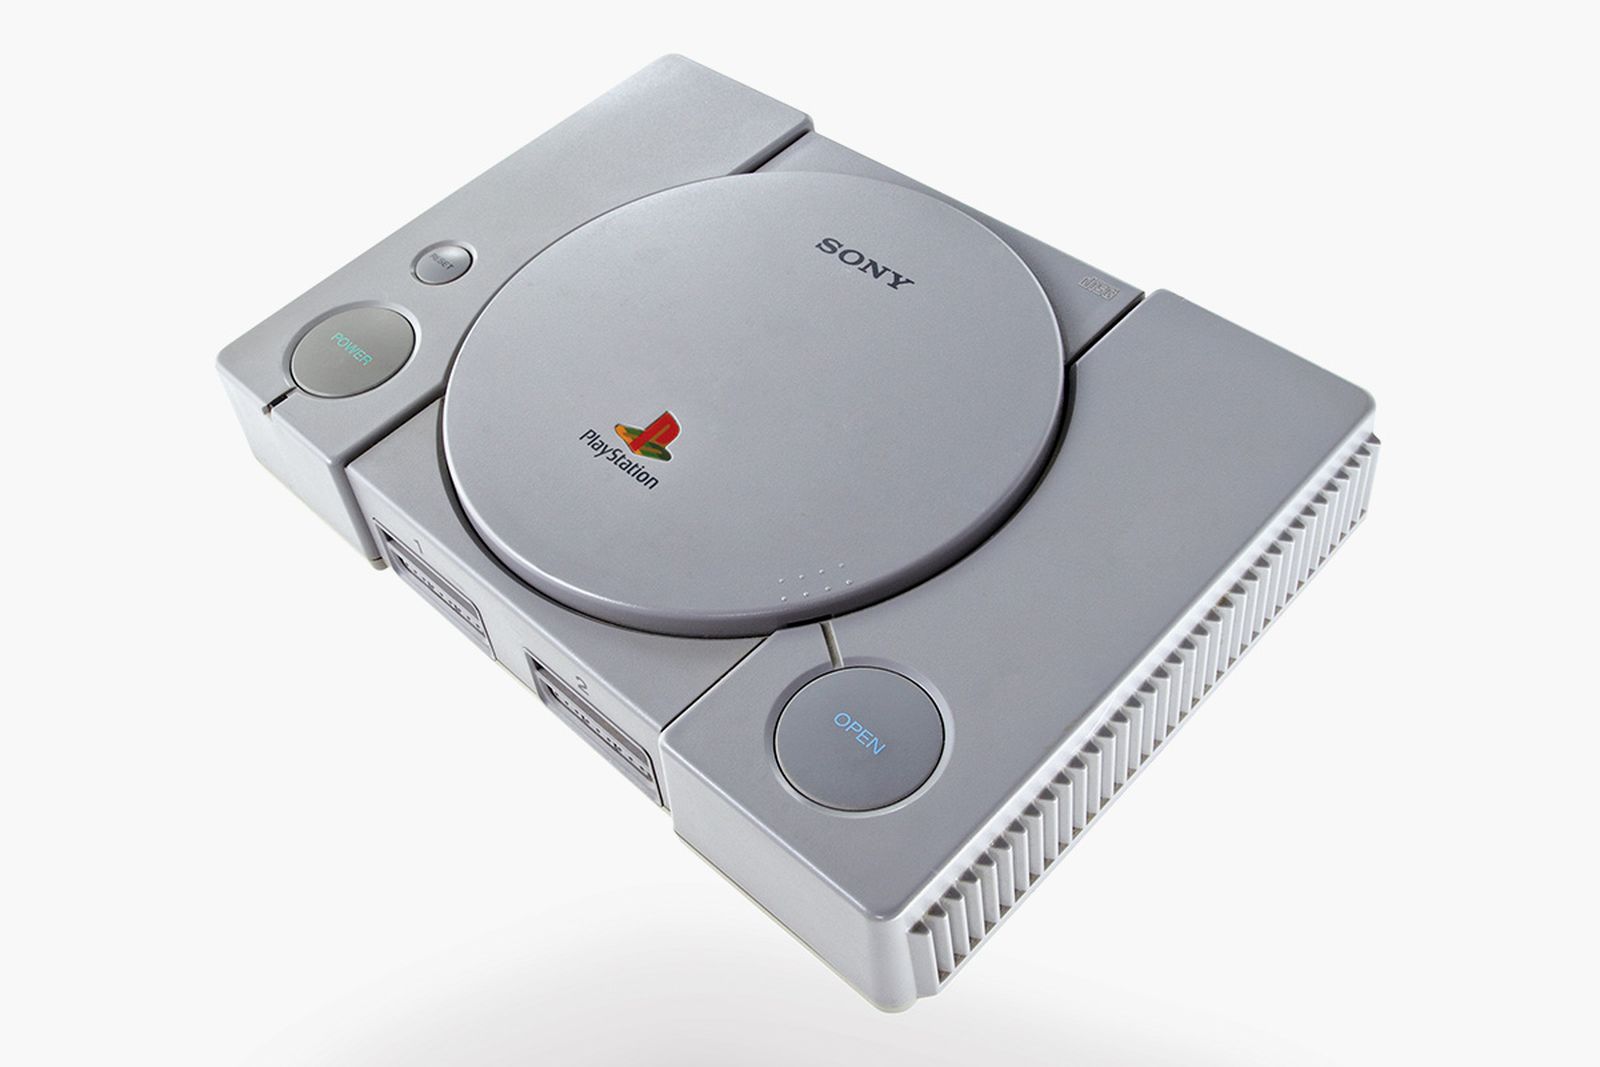 shampoo ore Independent Sony is Considering Bringing Back the Original PlayStation